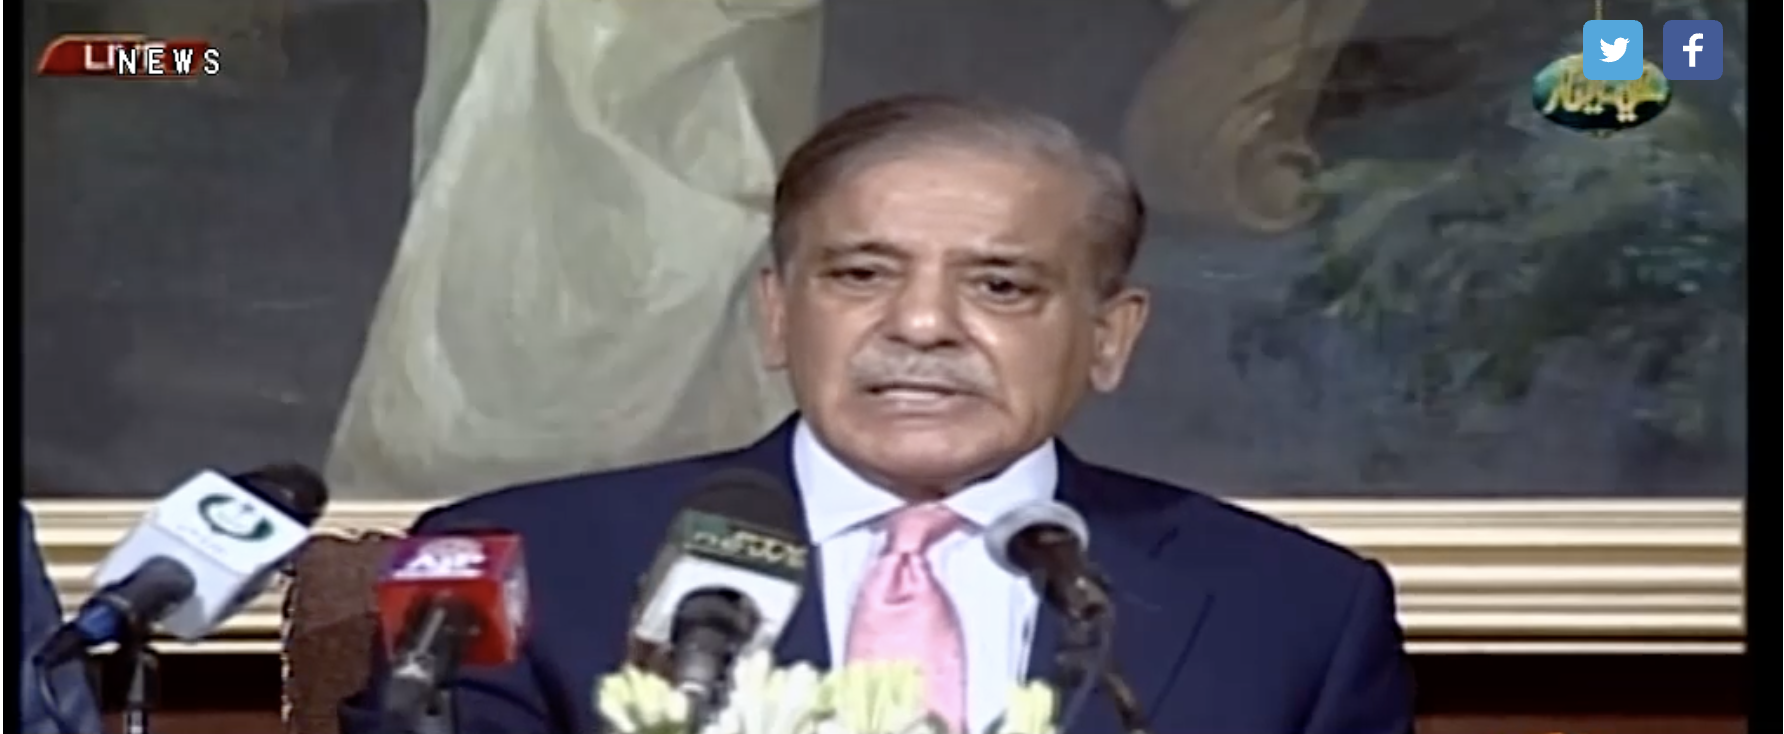 pm shehbaz addresses nation after staff level 3b pact with imf photo screengrab